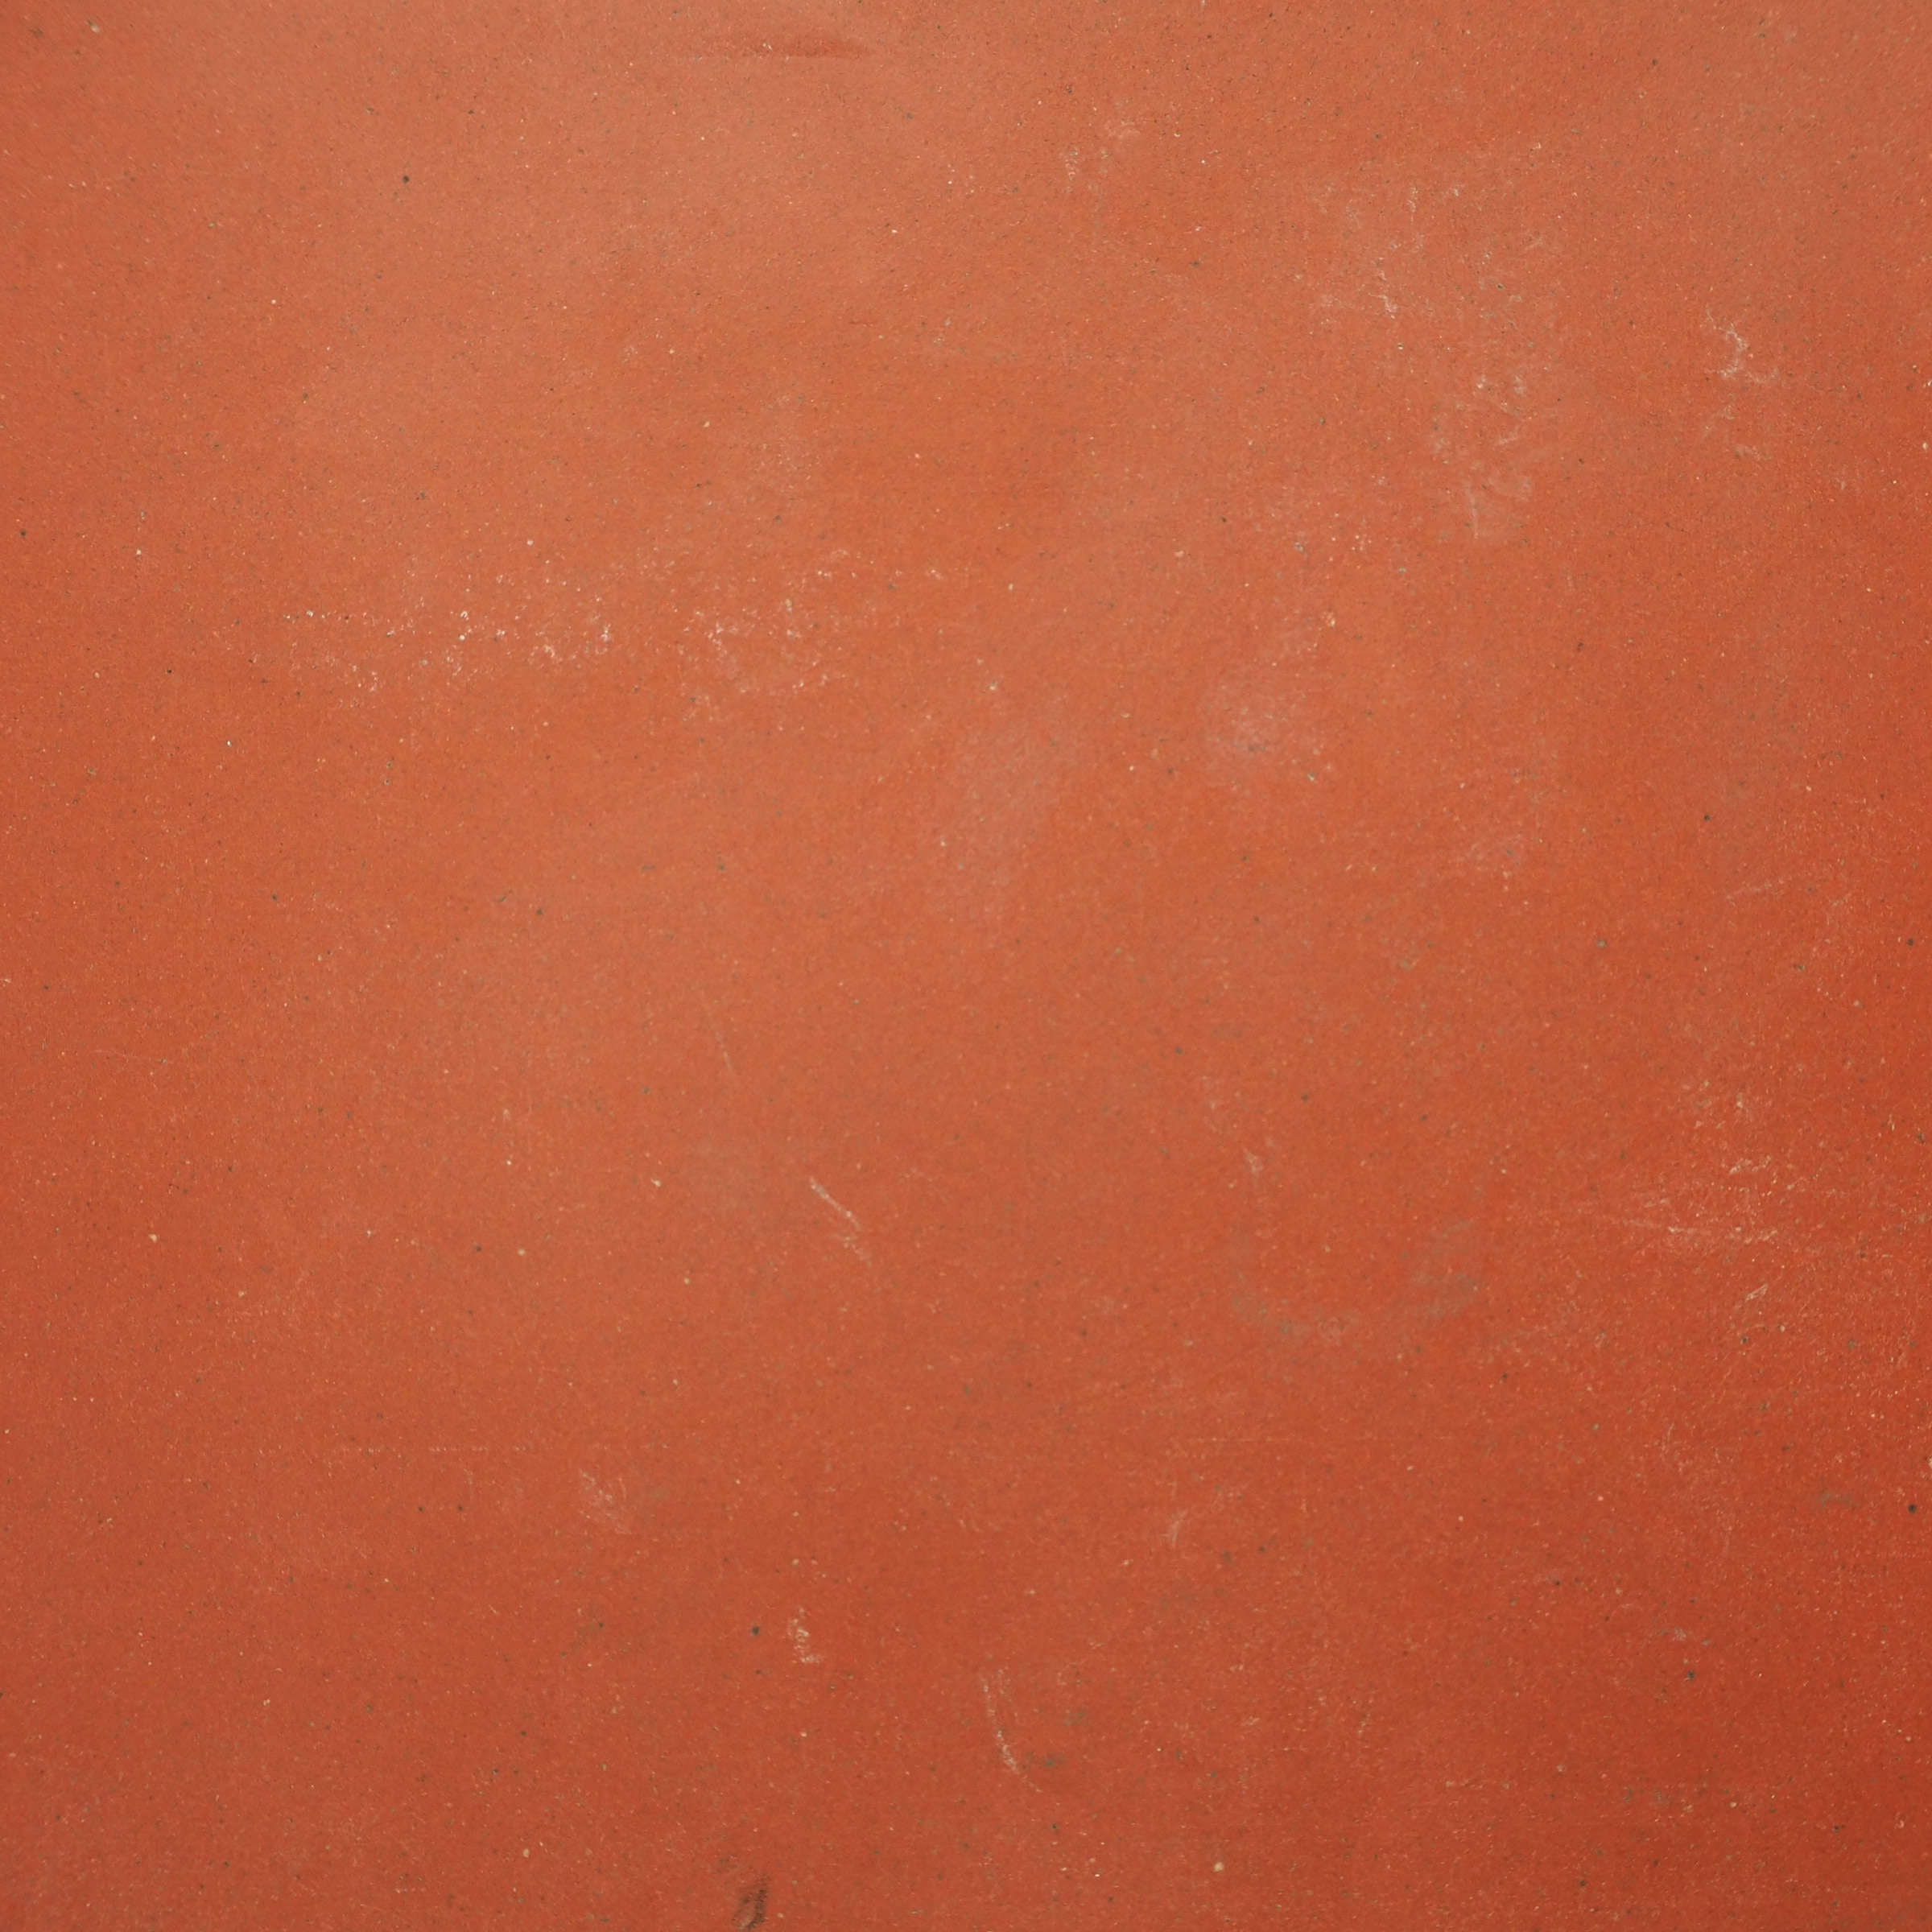 Batch of red ceramic tiles 'West Germany' (100 x 100 mm) - 9 m2